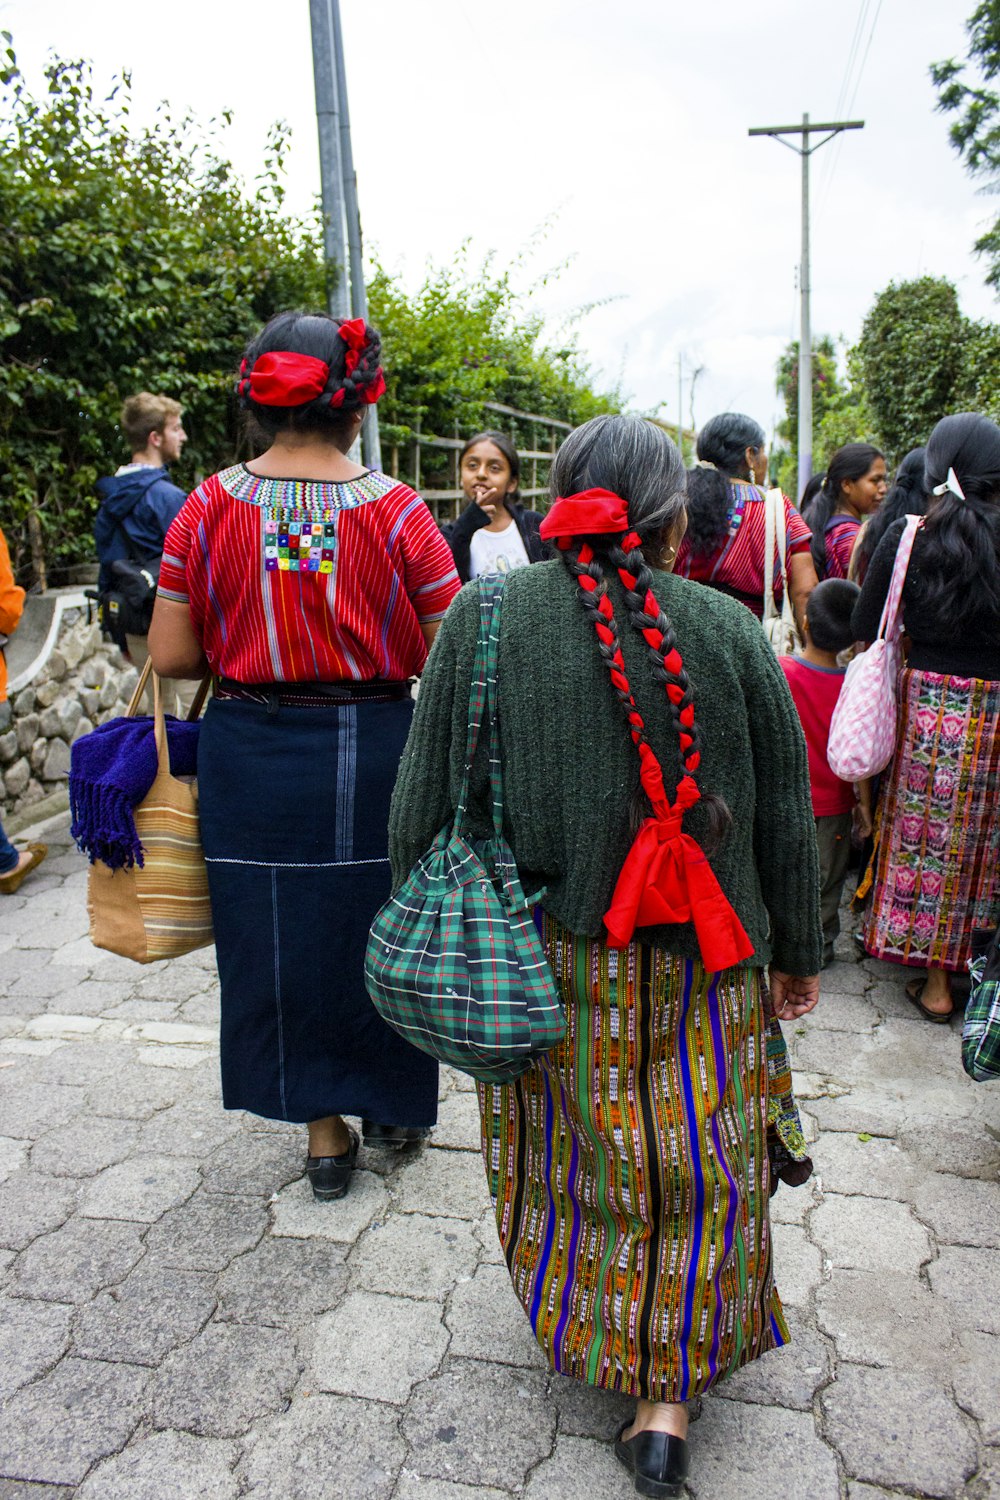 people in red and blue traditional dress walking on street during daytime